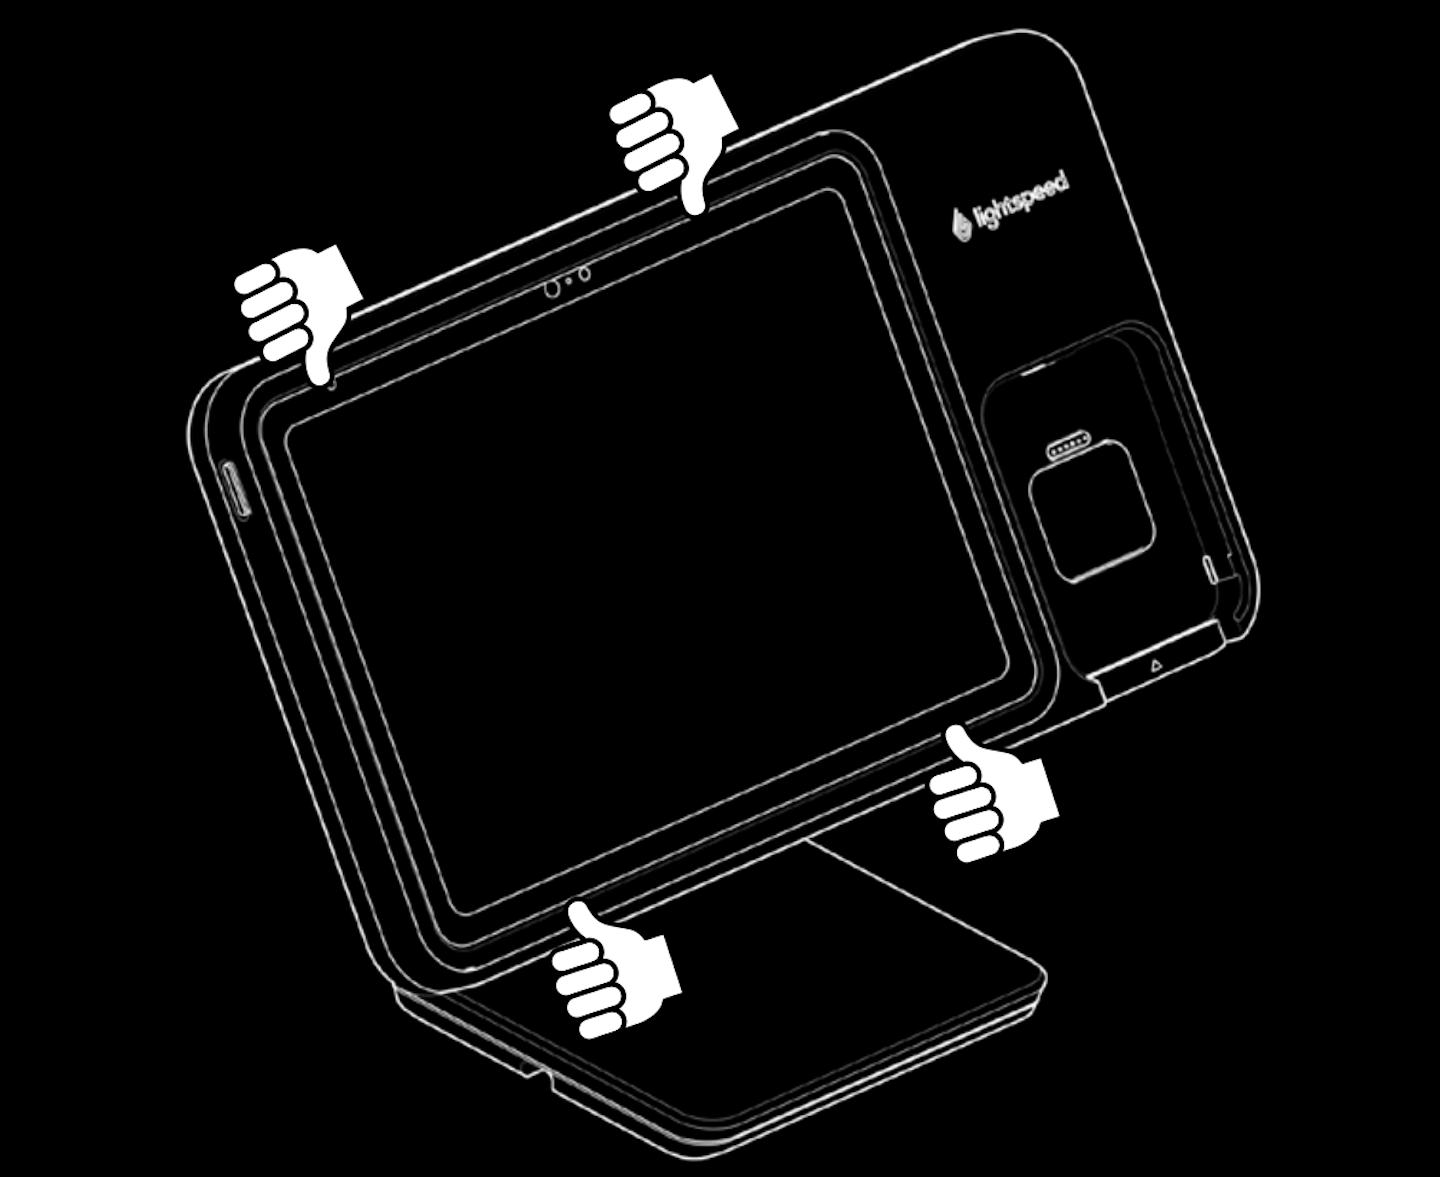 Illustration of Lightspeed Stand with Payments with bezel placed. Illustrations of hands indicate that the bezel should be pressed down using thumbs.